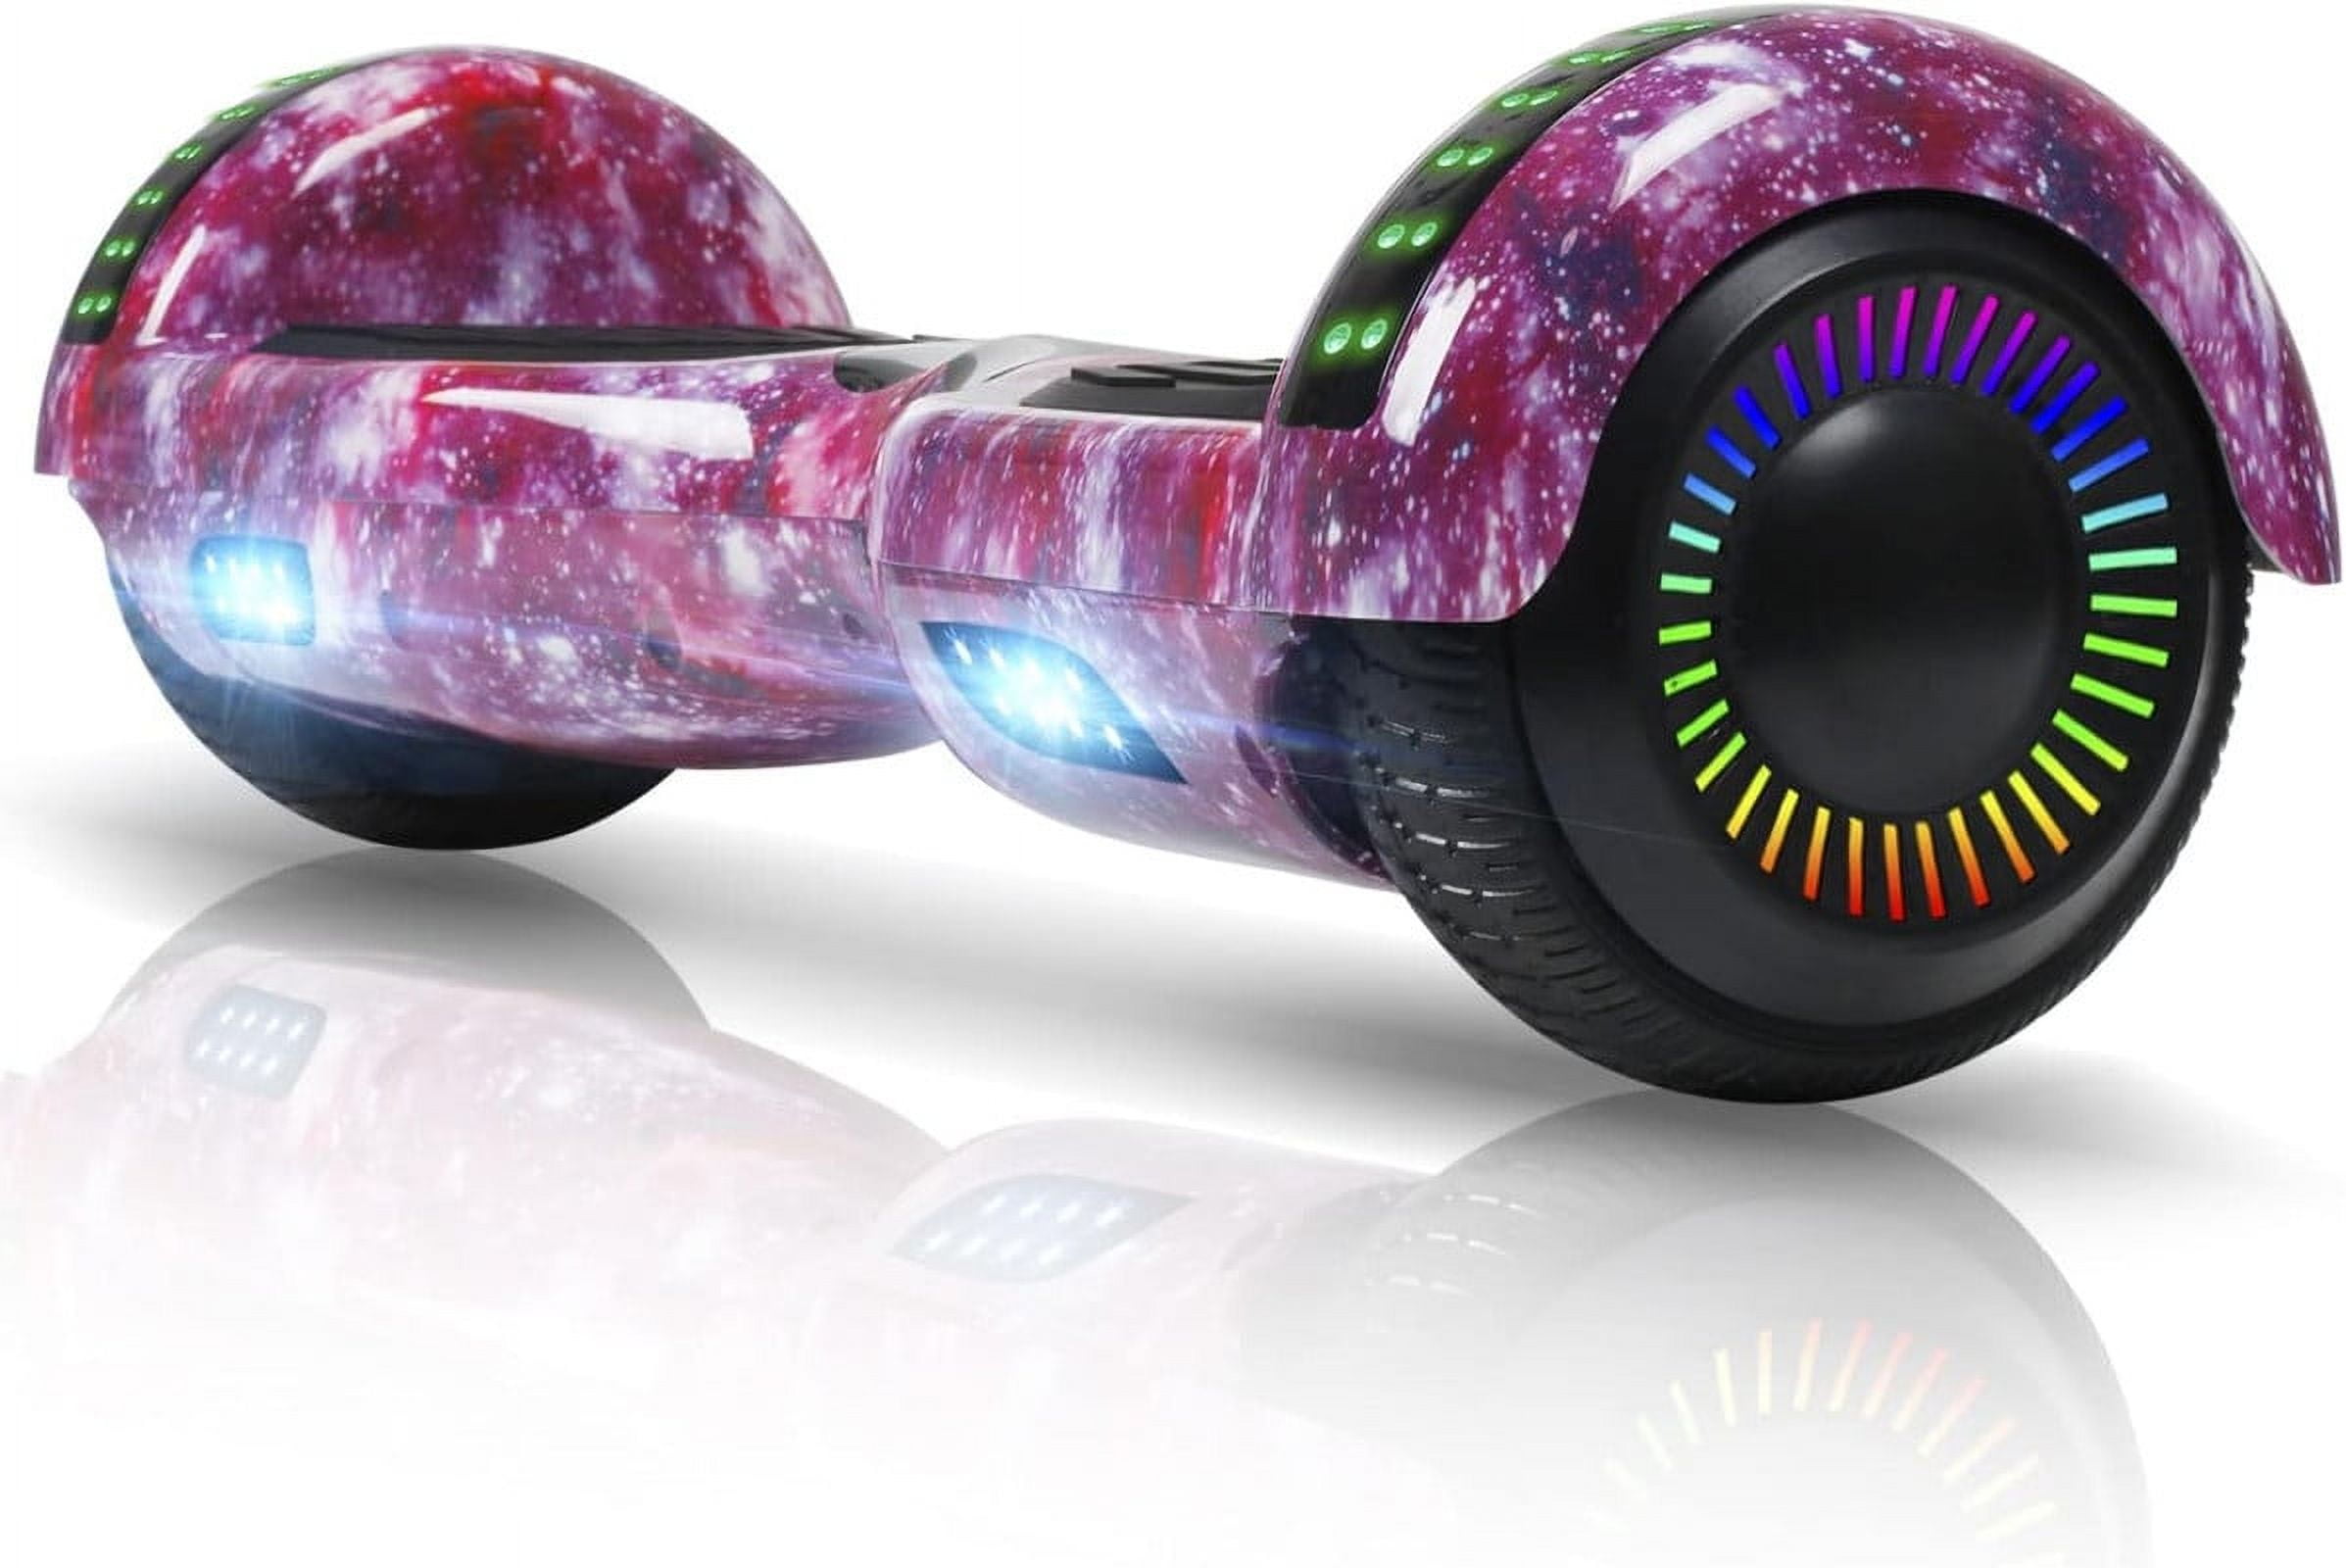 Hoverboards : Patinete electrico hoverboard 6,5 Pack skate con